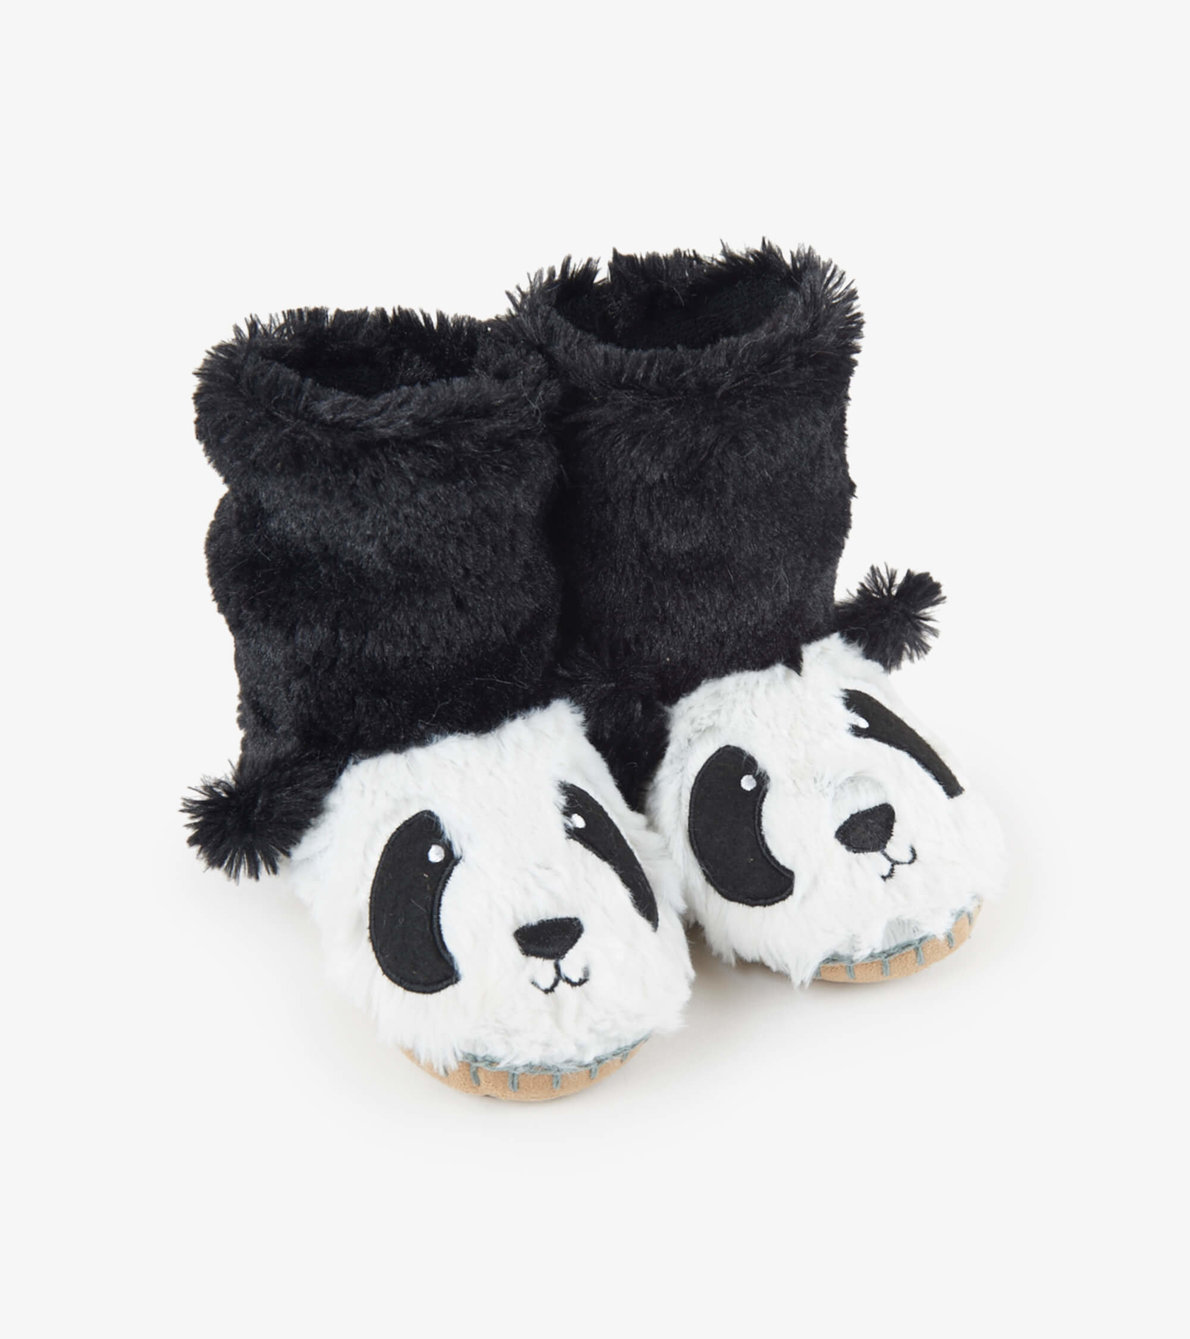 View larger image of Panda Kids Fuzzy Slouch Slippers